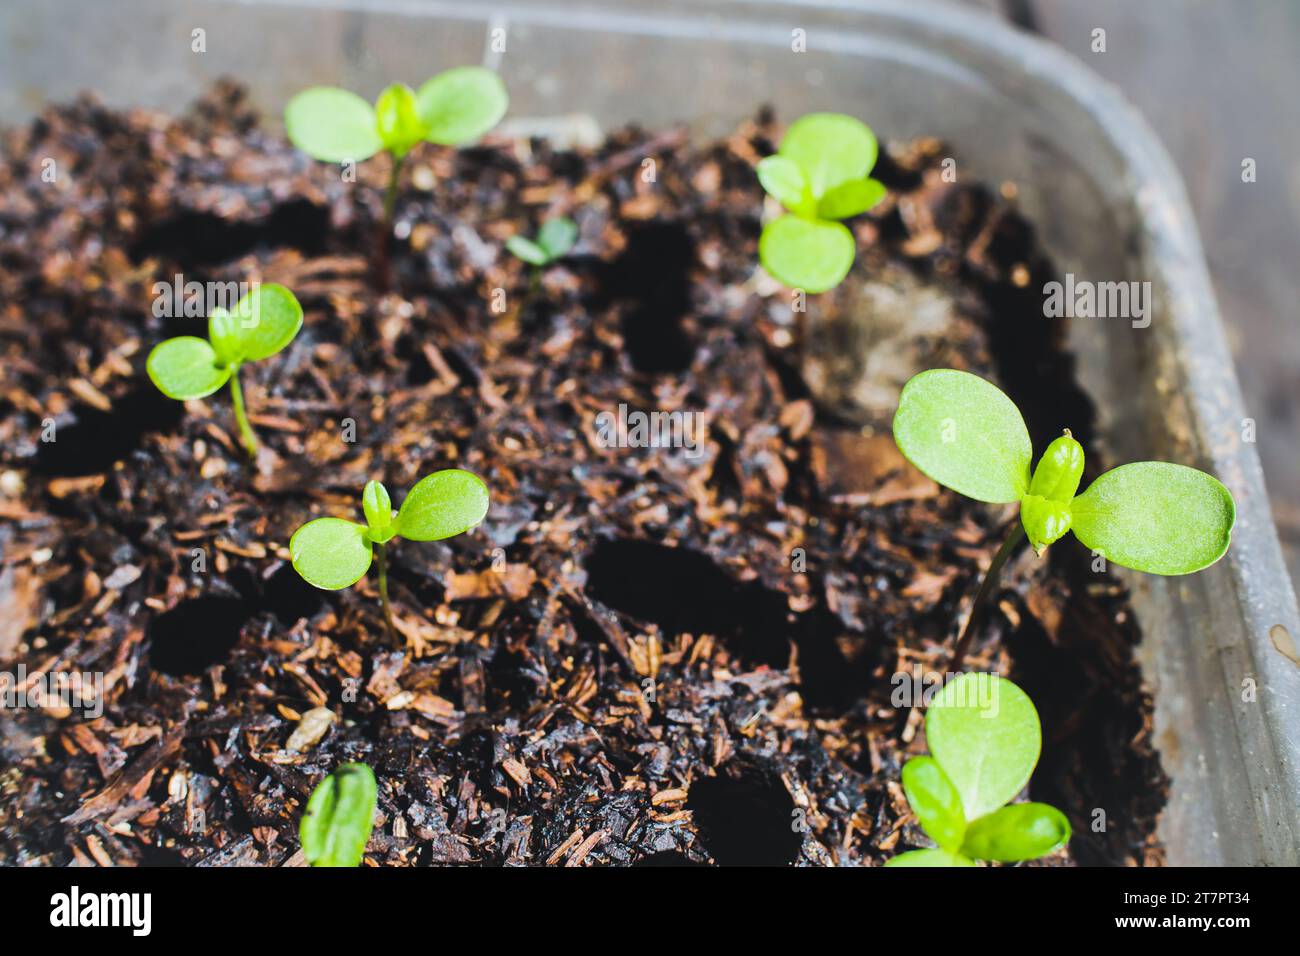 Potted flower seedlings. Zinnia seedlings planting and growing in recycled plastic pot. Close up. Selective focus. Stock Photo